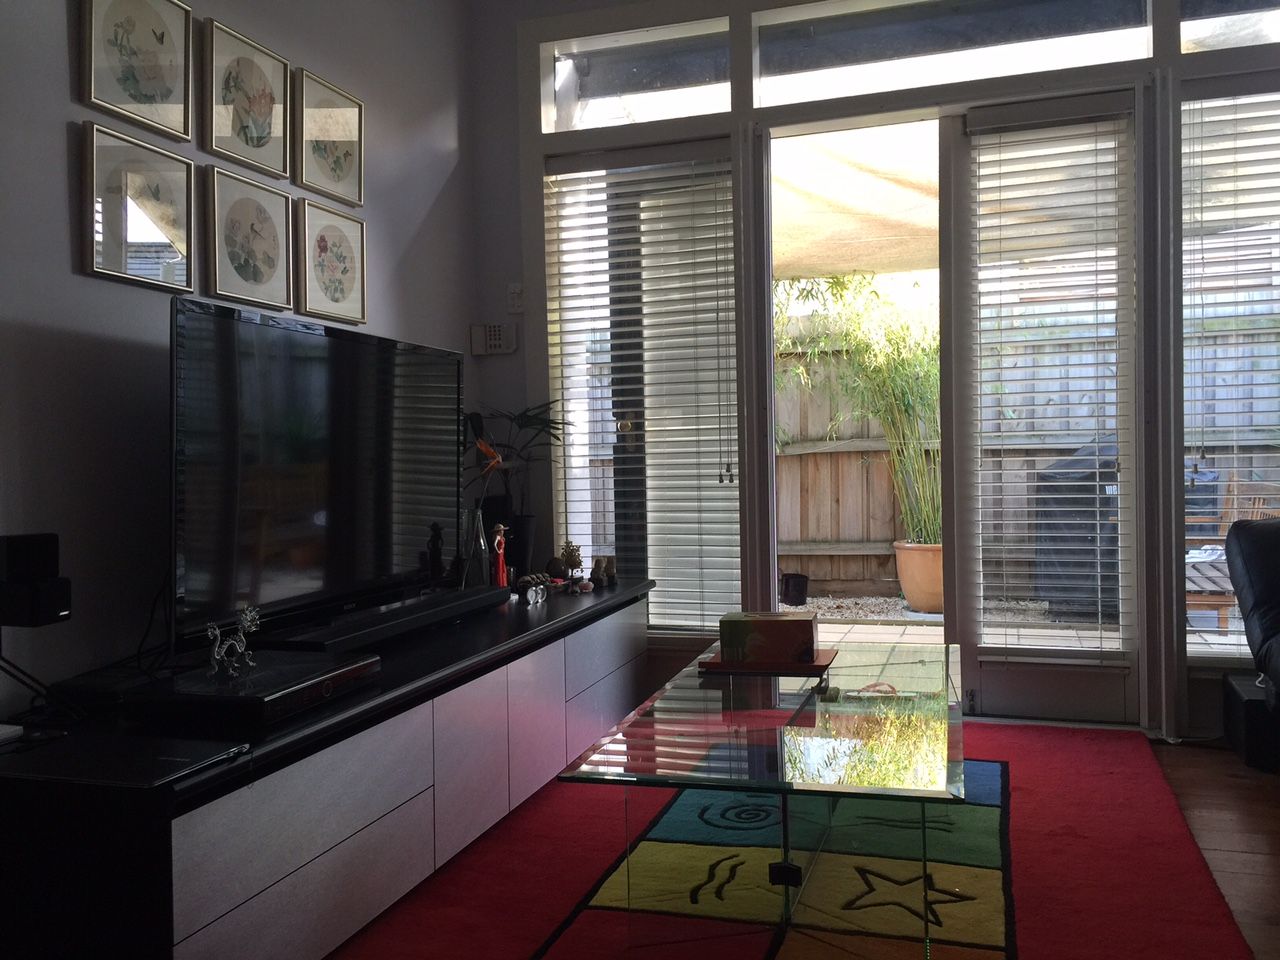 2 bedrooms House in 10 Hardy Street SOUTH YARRA VIC, 3141